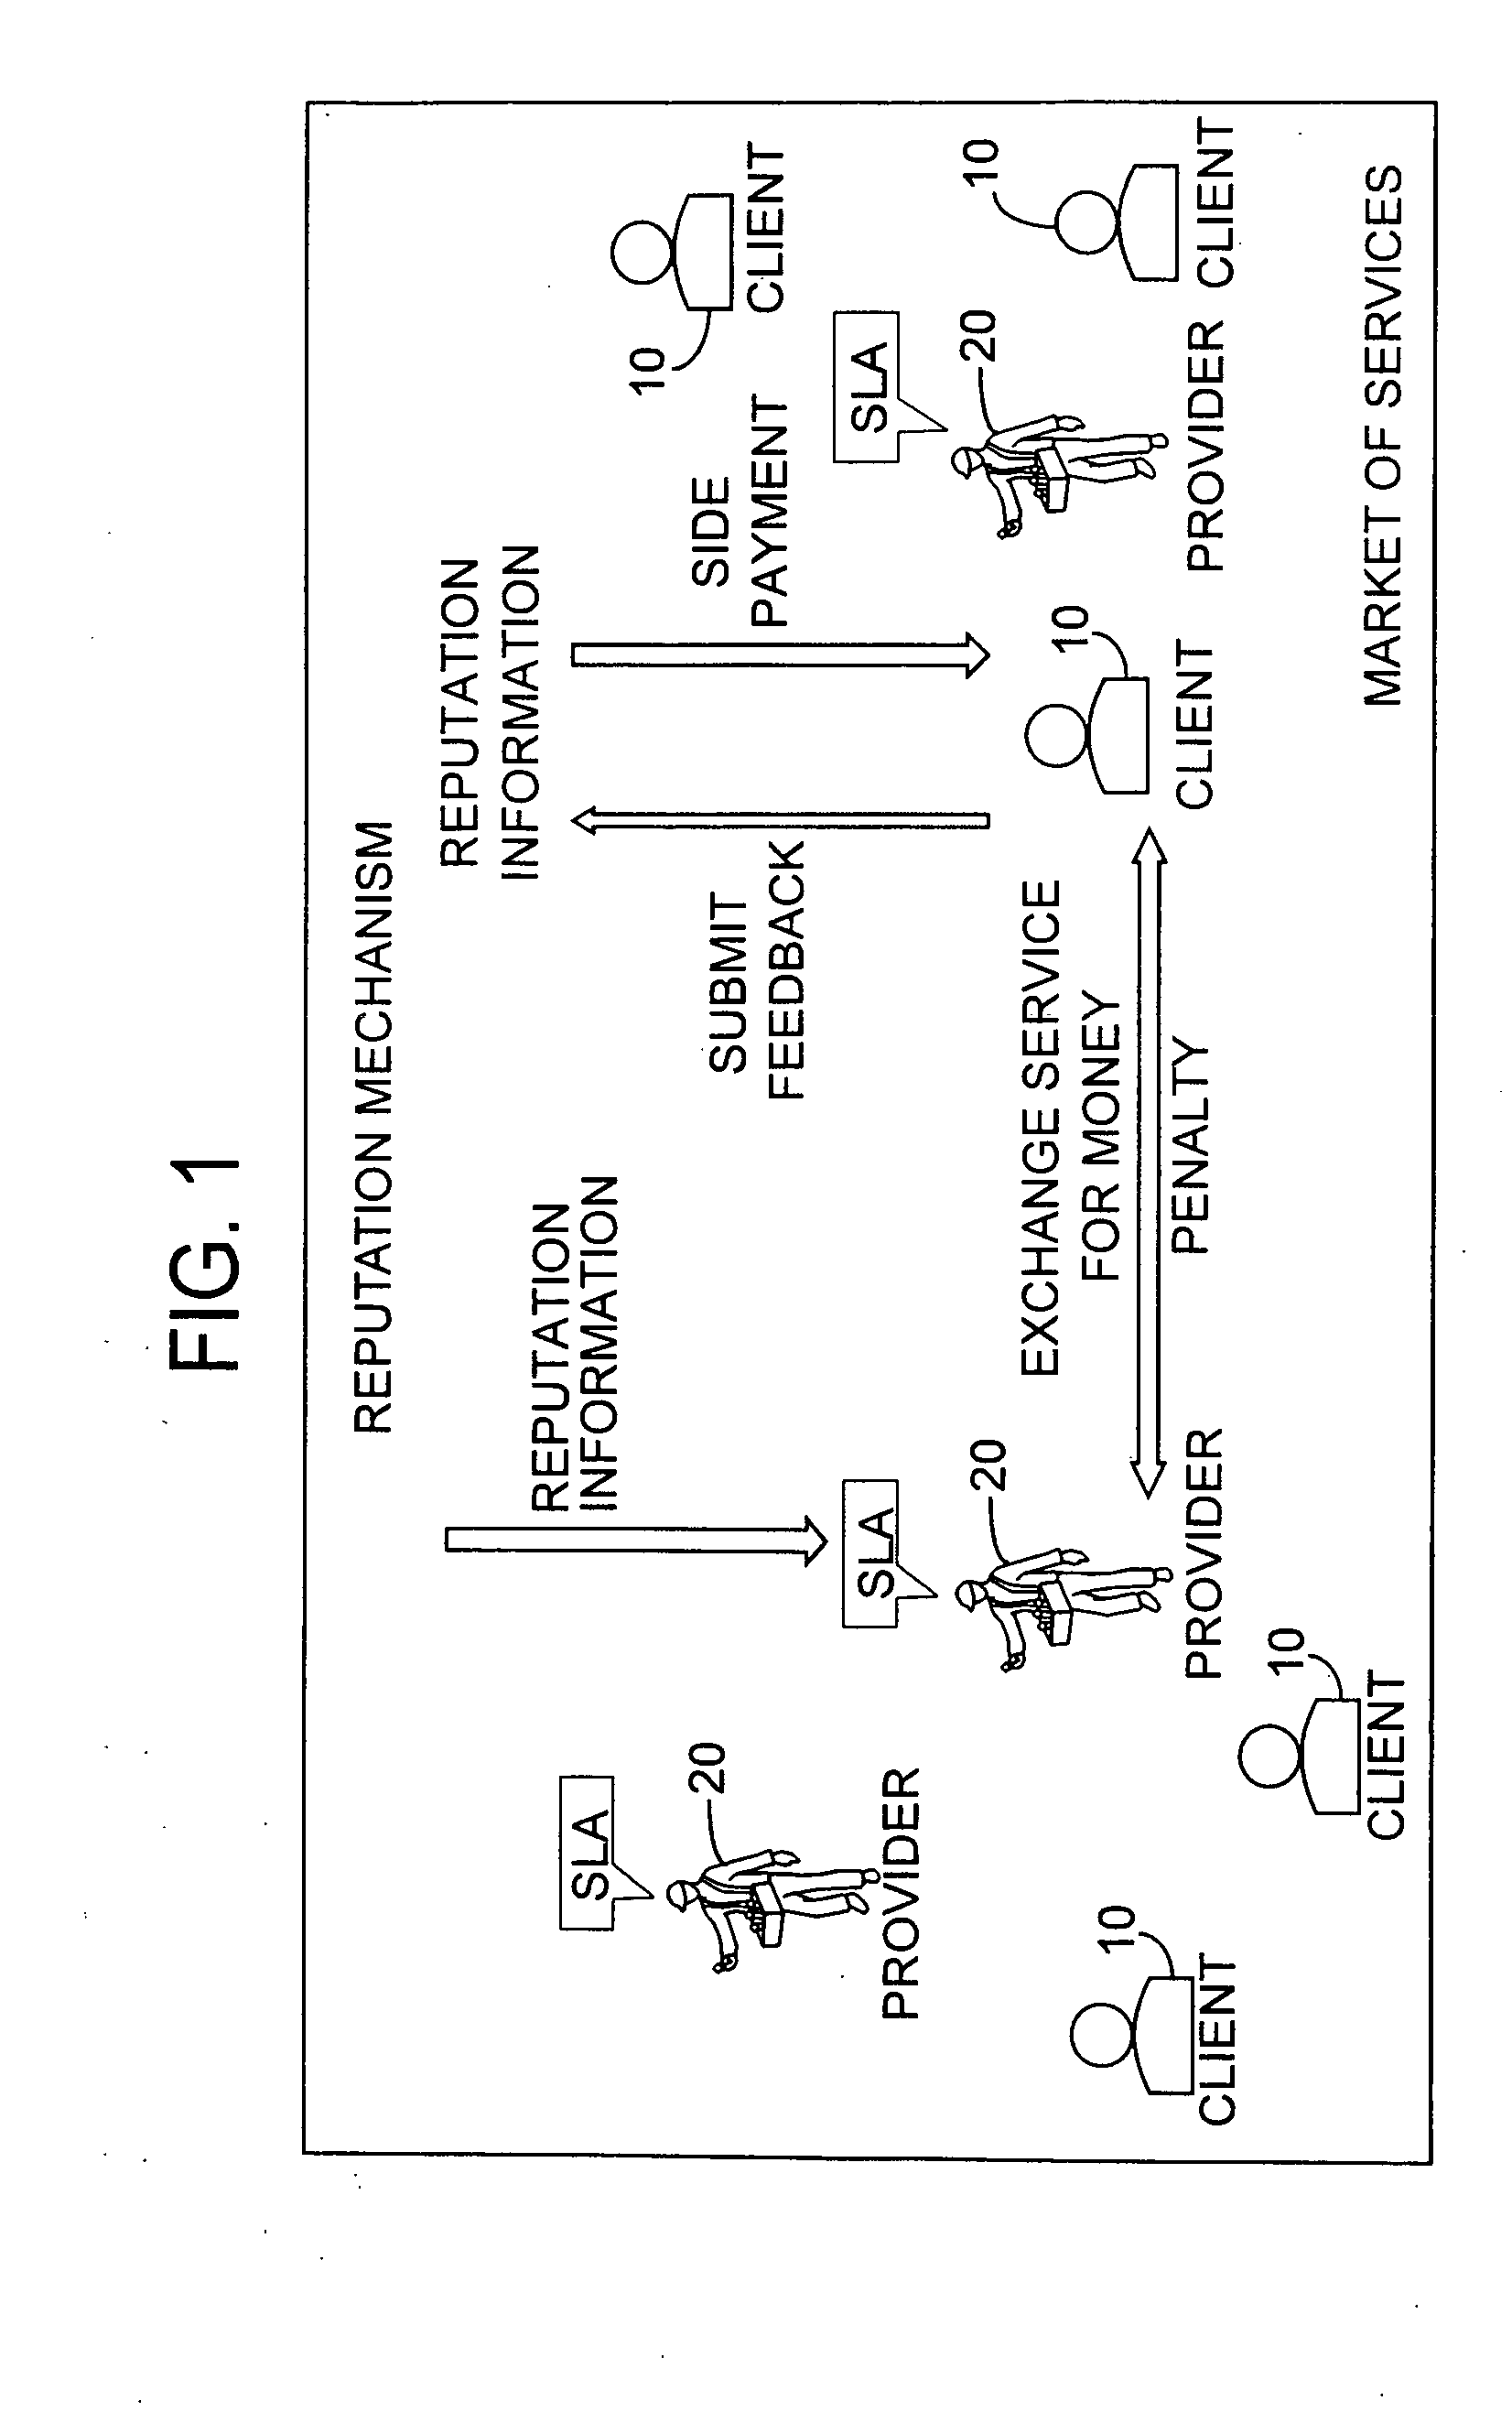 System and method for monitoring quality of service